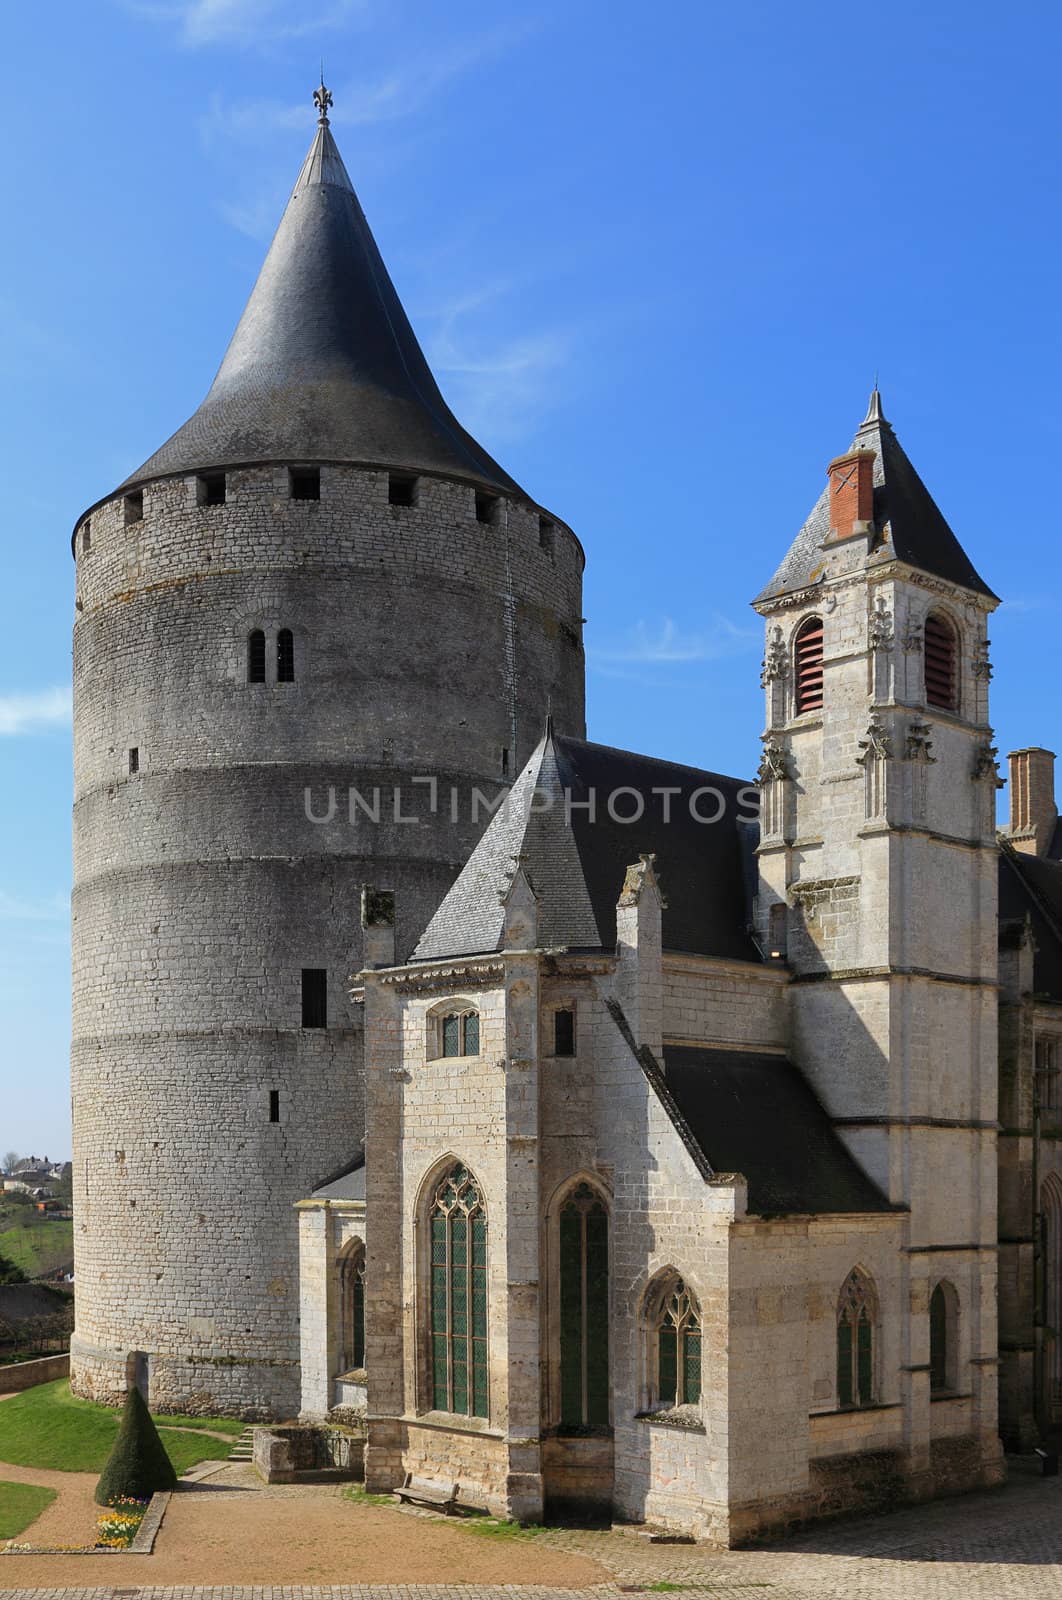 Image of the saint chapel and the donjon from Chateaudun Castle located in French departement Eure et Loir.